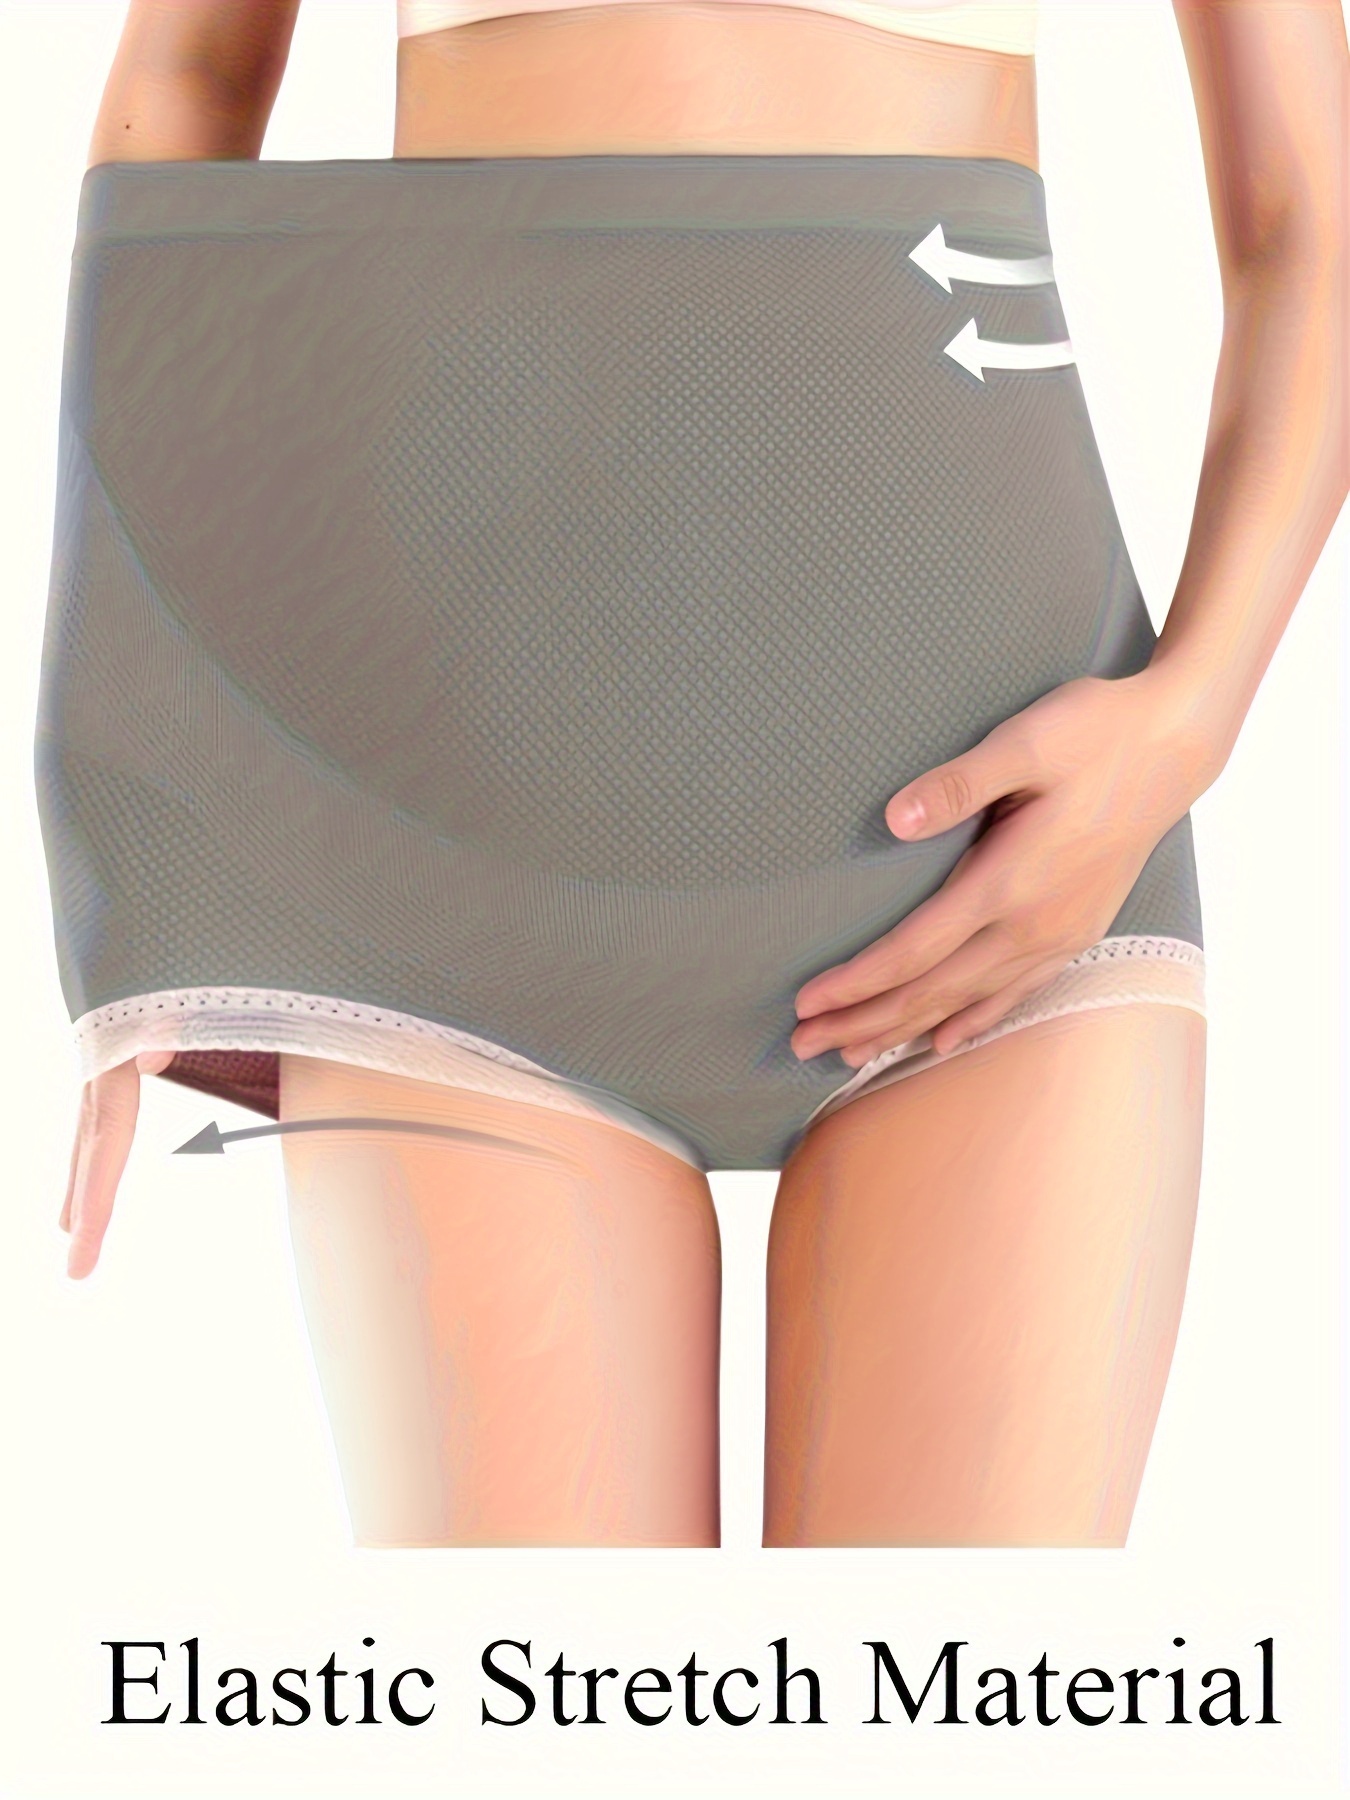 🐘Boo&Bub🐘 Cotton Maternity Panties, High Waist Adjustable Belly Pregnancy  Underwear Clothes for Pregnant Women